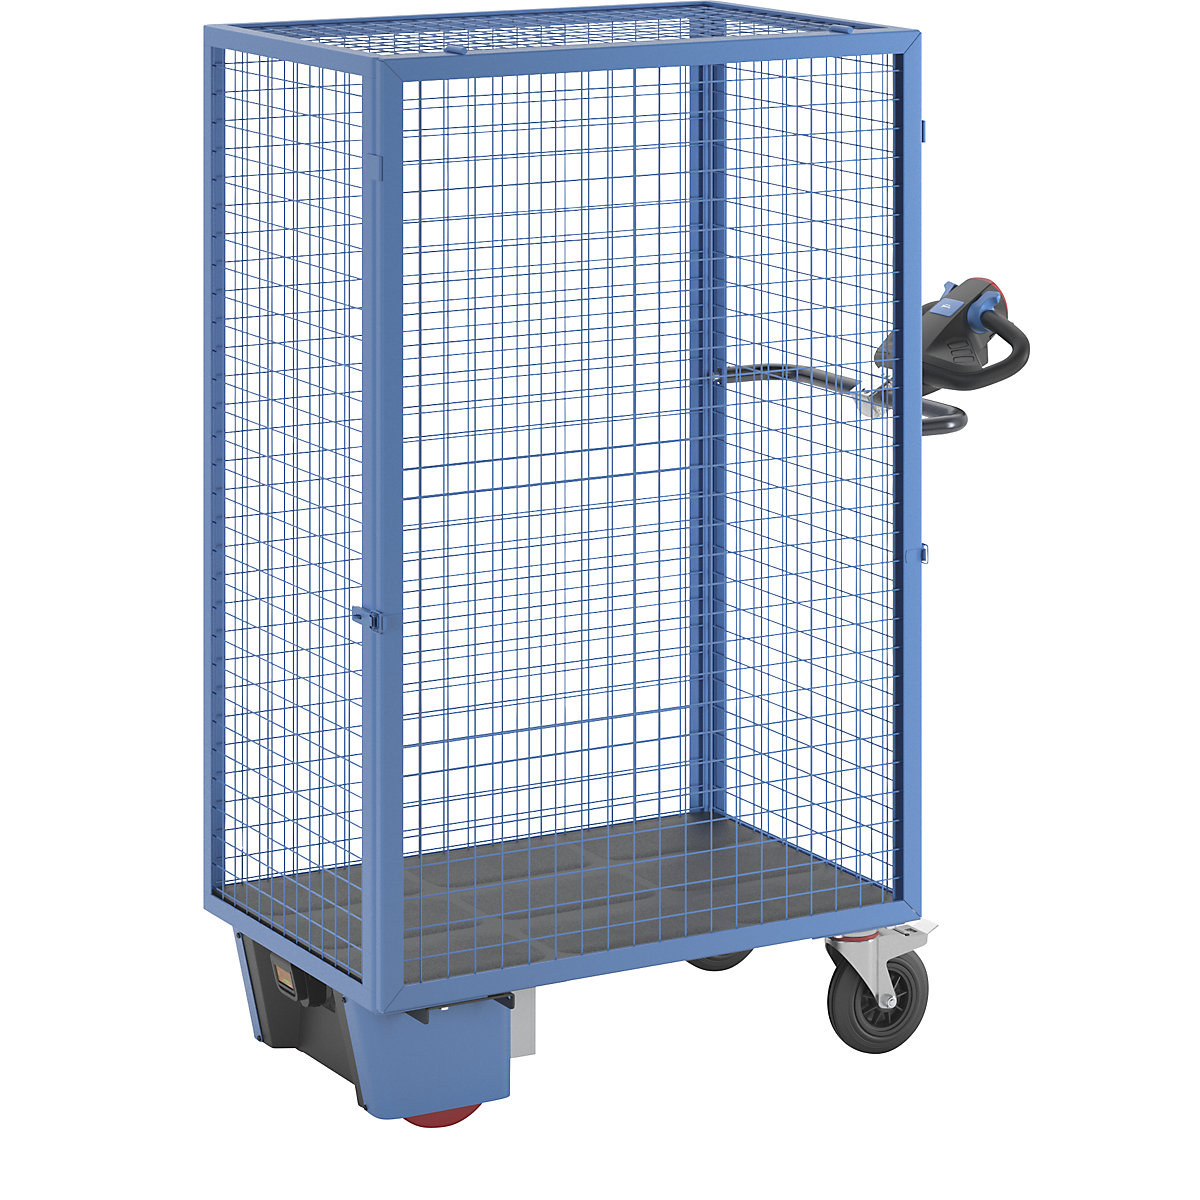 Shelf truck with electric drive – eurokraft pro, 3 sided with/without detachable mesh panel, detachable mesh panel, LxWxH 1470 x 740 x 1810 mm-1